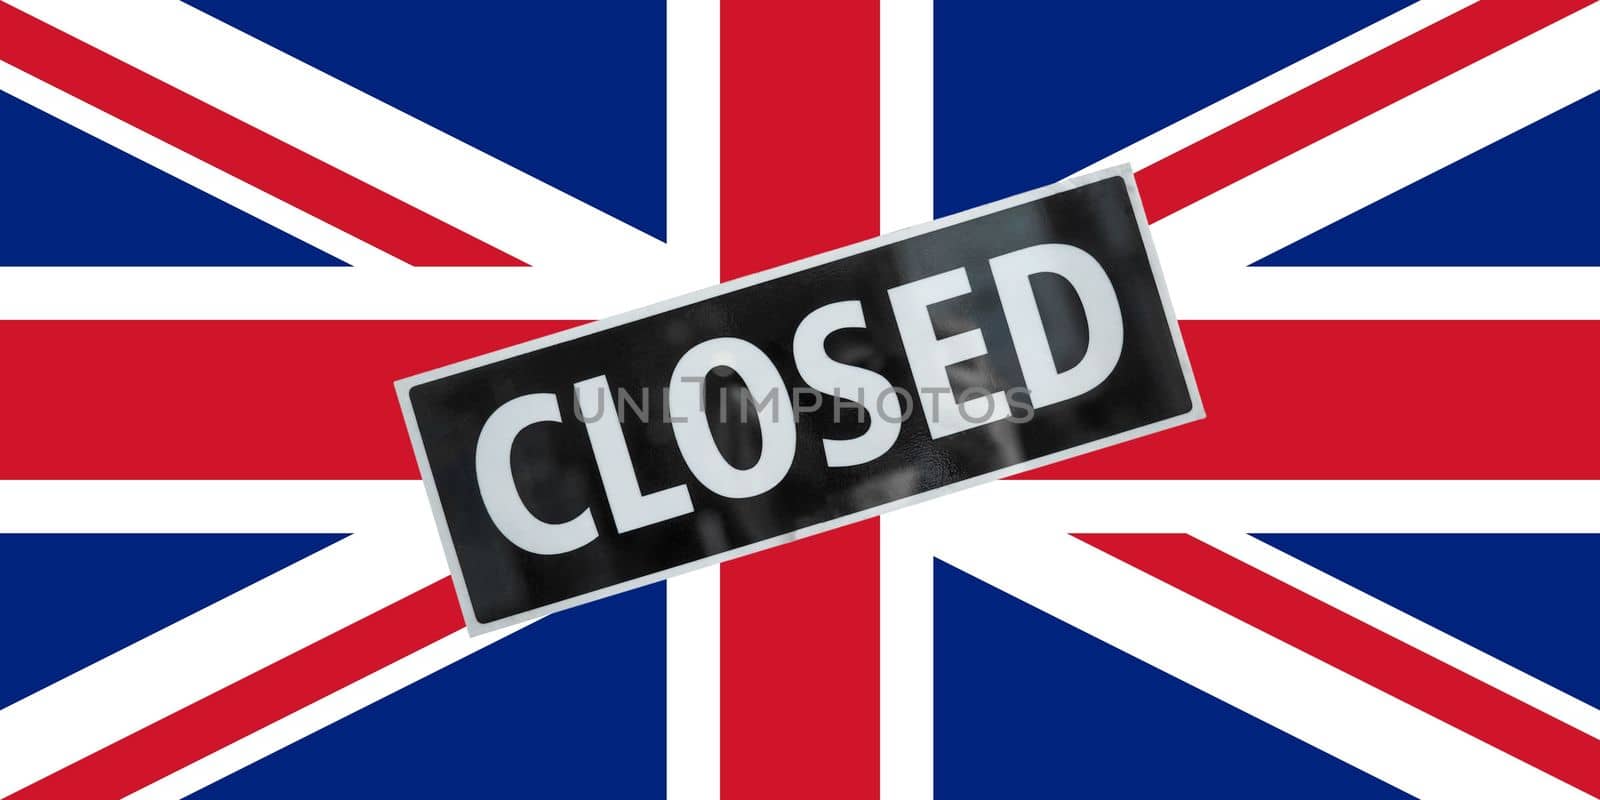 the British national flag of United Kingdom, Europe with closed sign